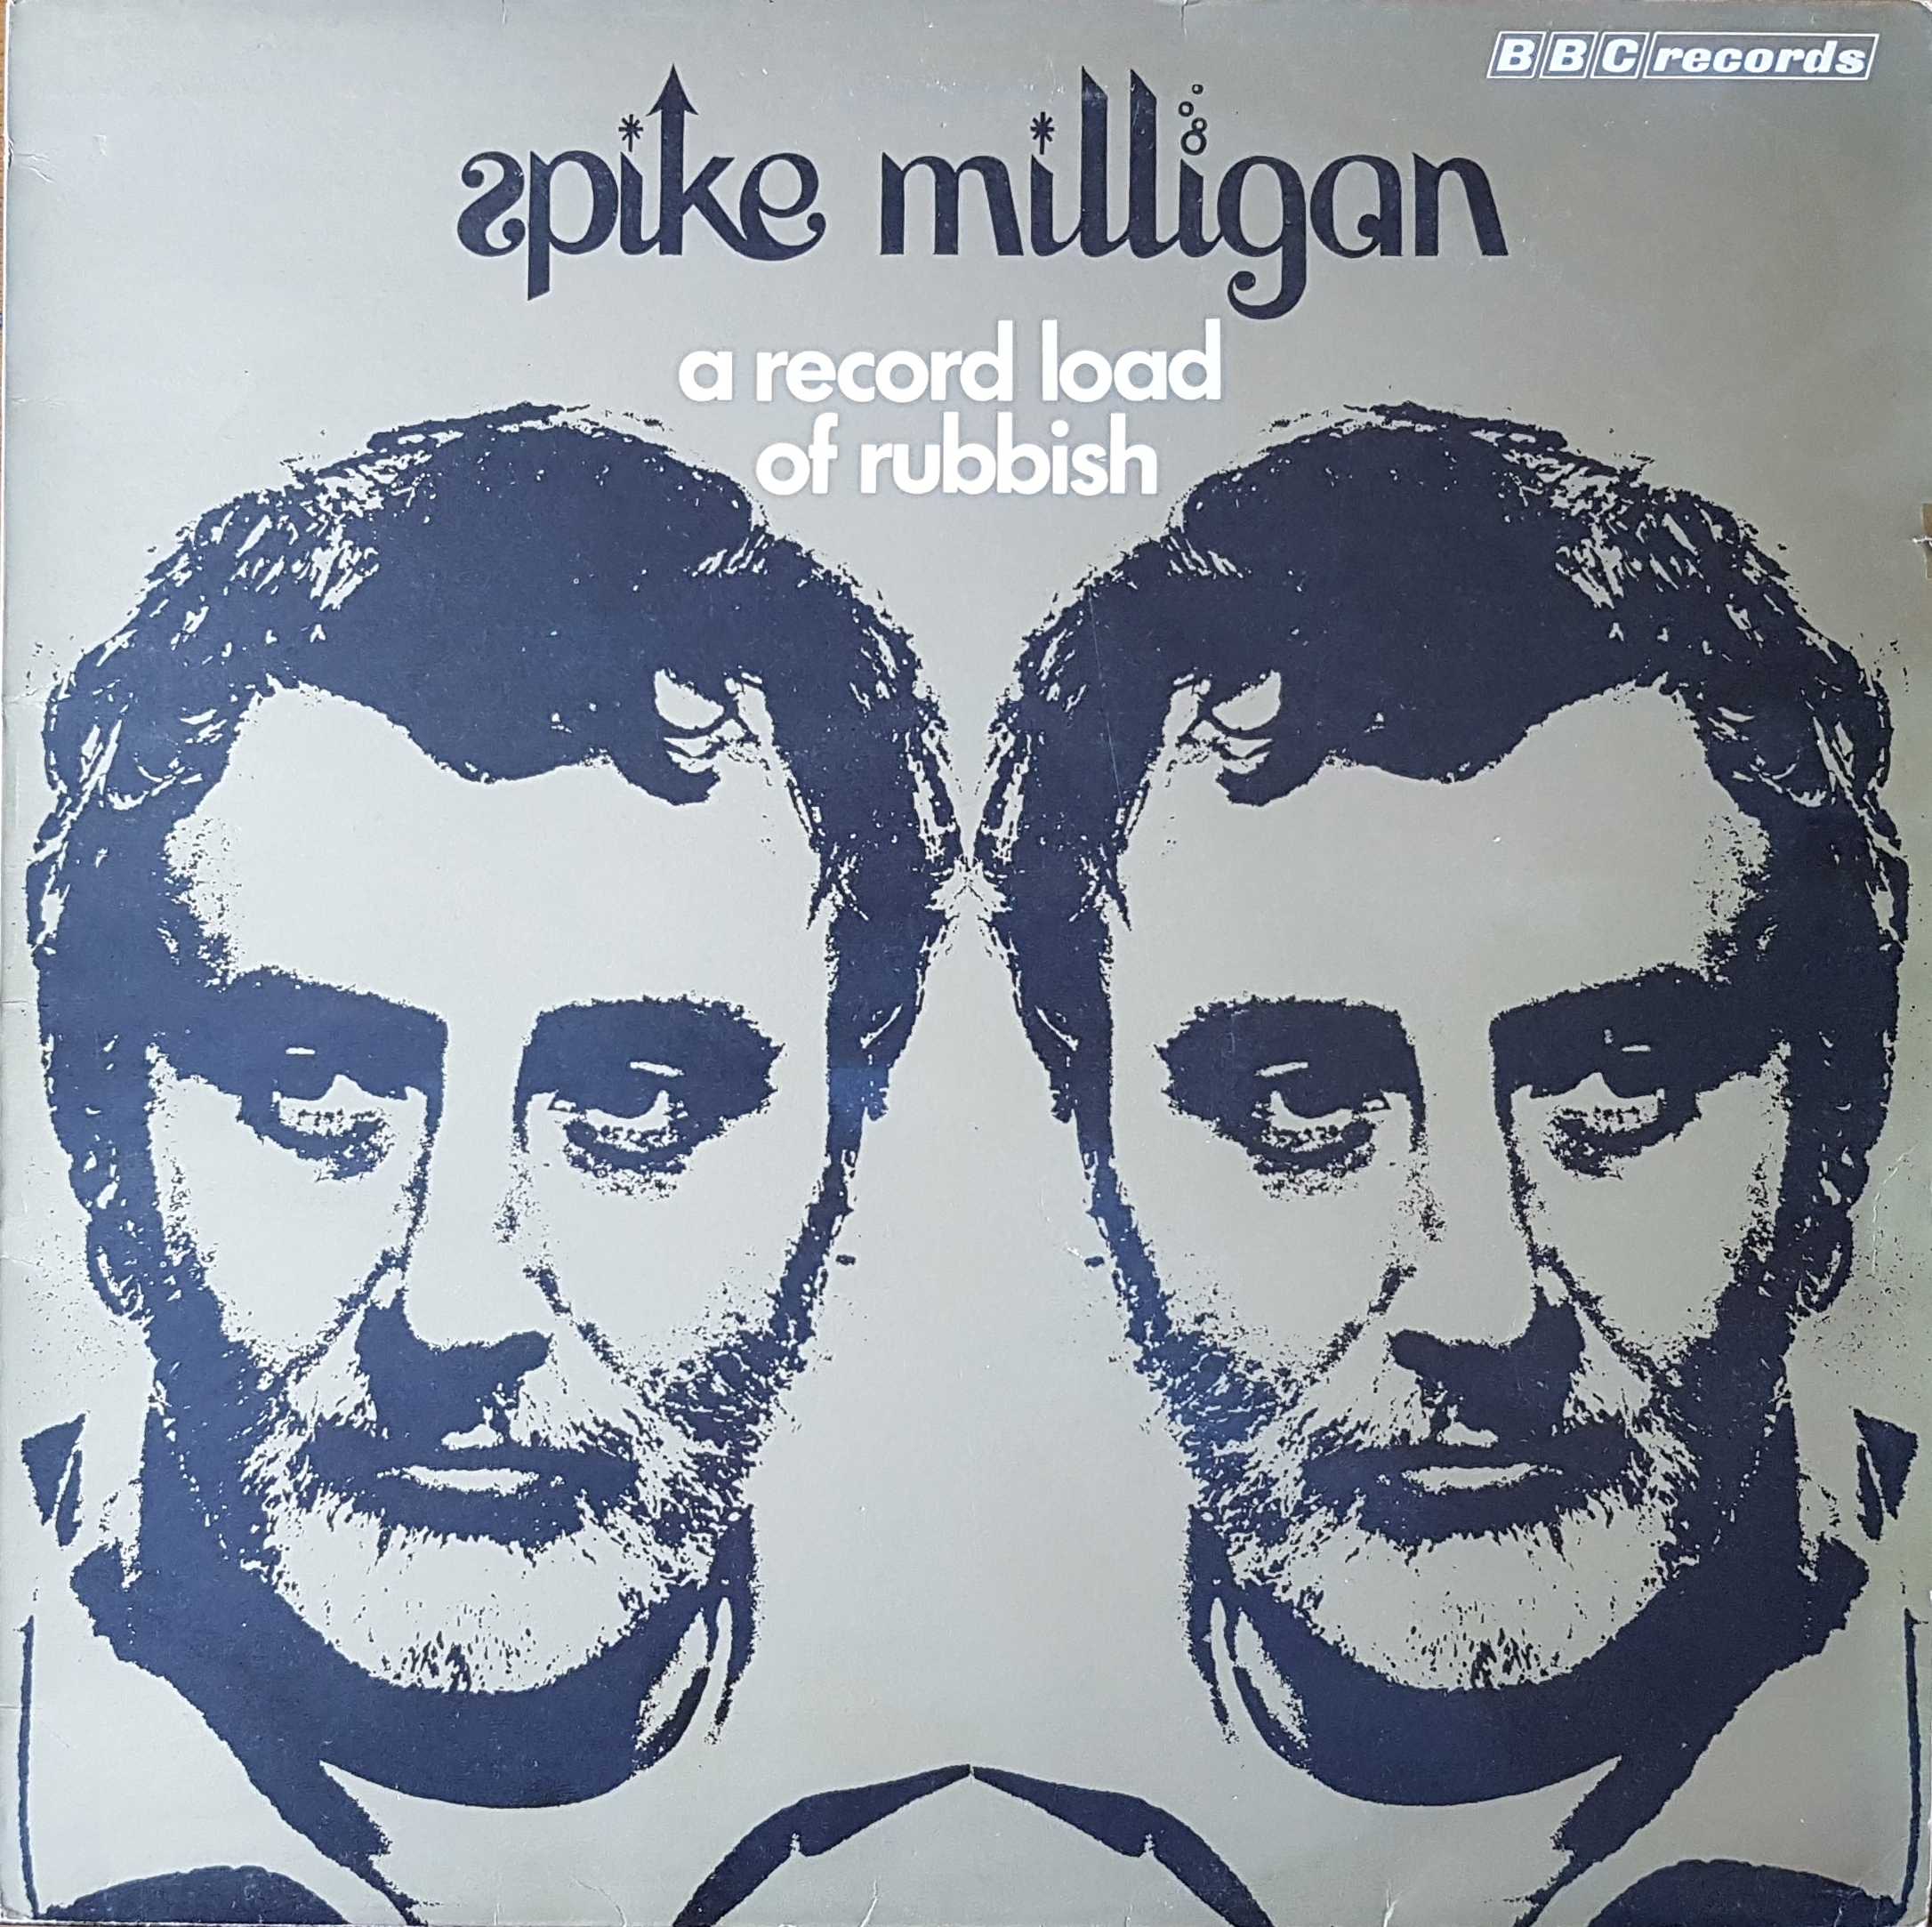 Picture of RED 98 Spike Milligan, a record load of rubbish by artist Spike Milligan